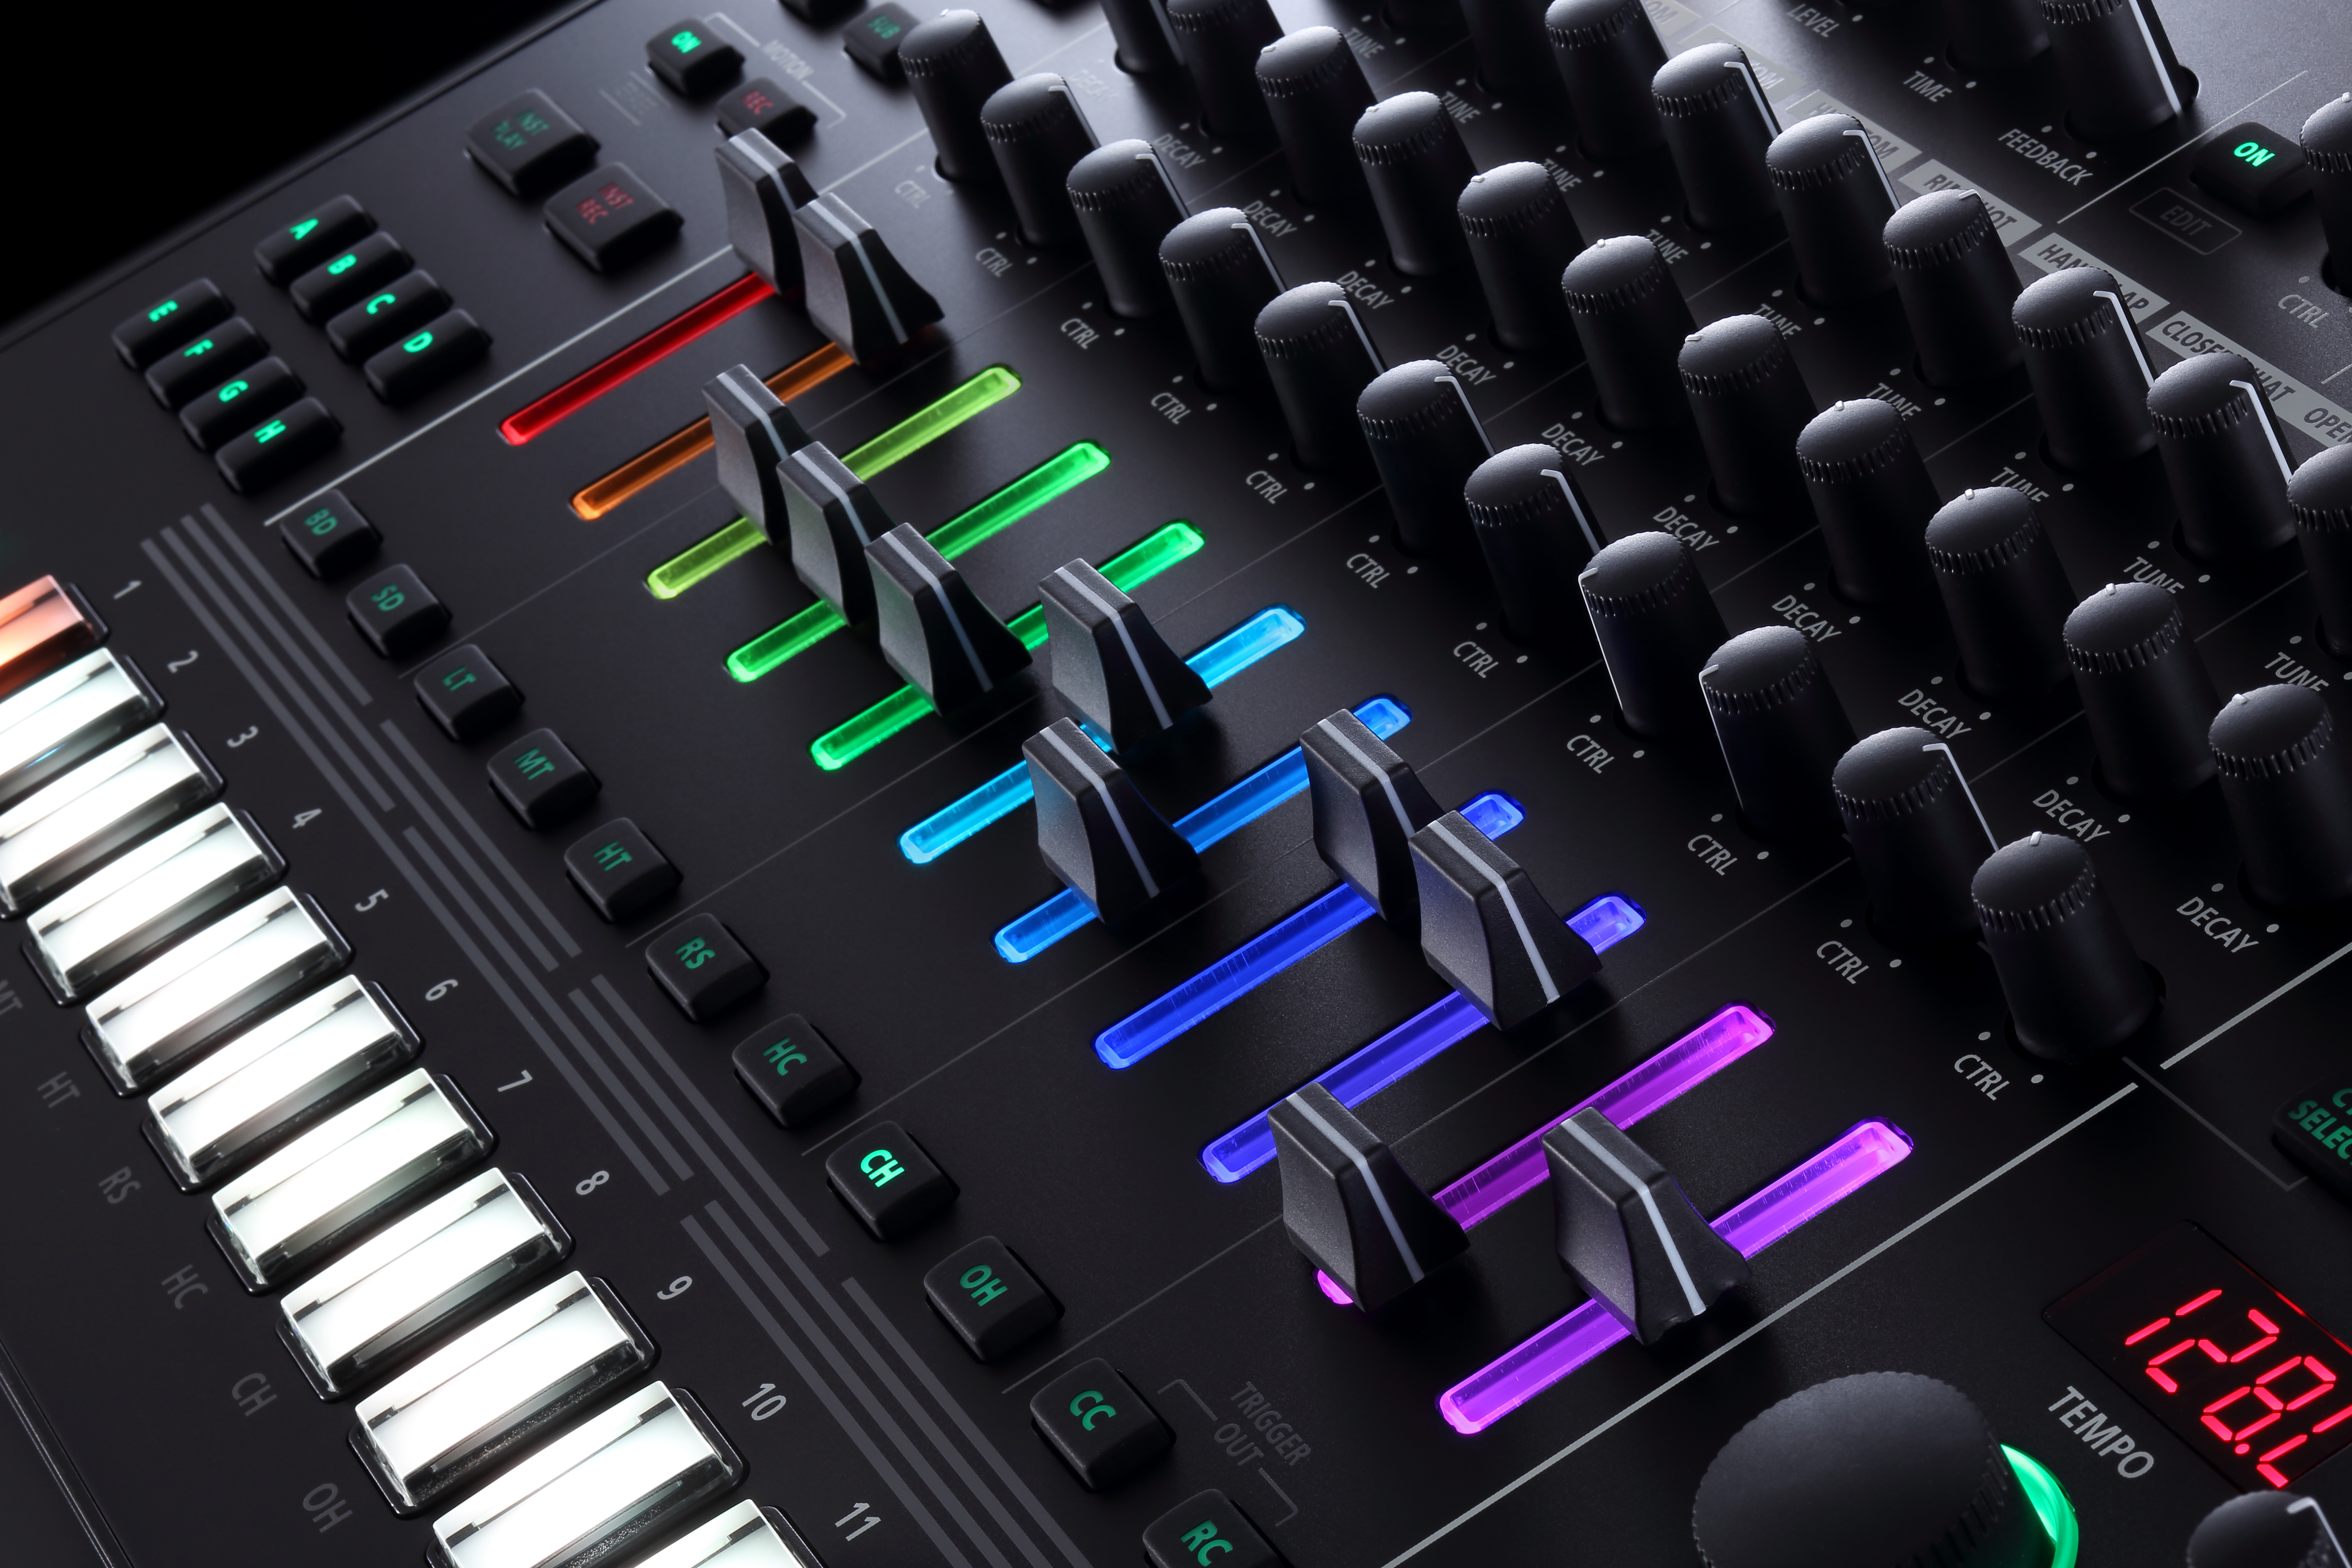 All Roland’s classic drum machines are packed into their new TR-8S